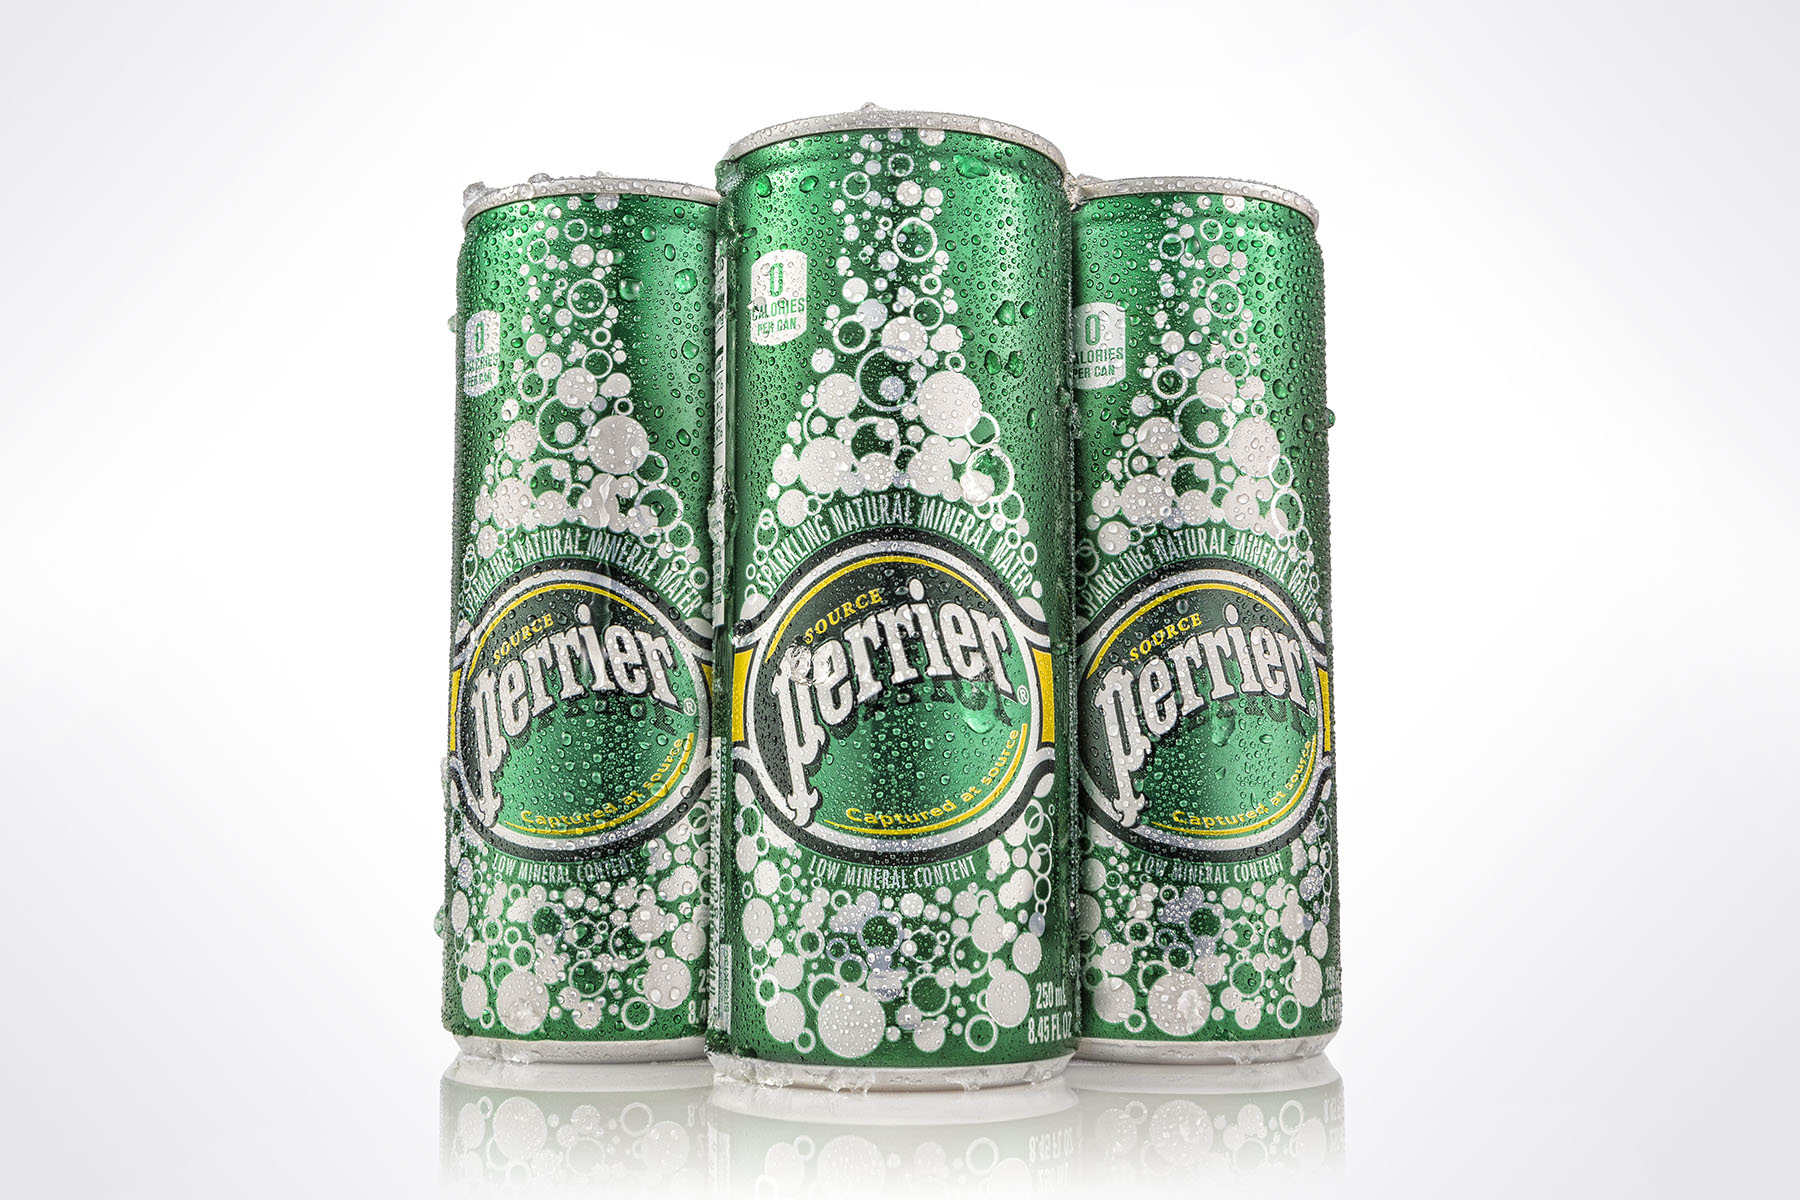 Perrier Cans | Dovis Bird Agency Reps